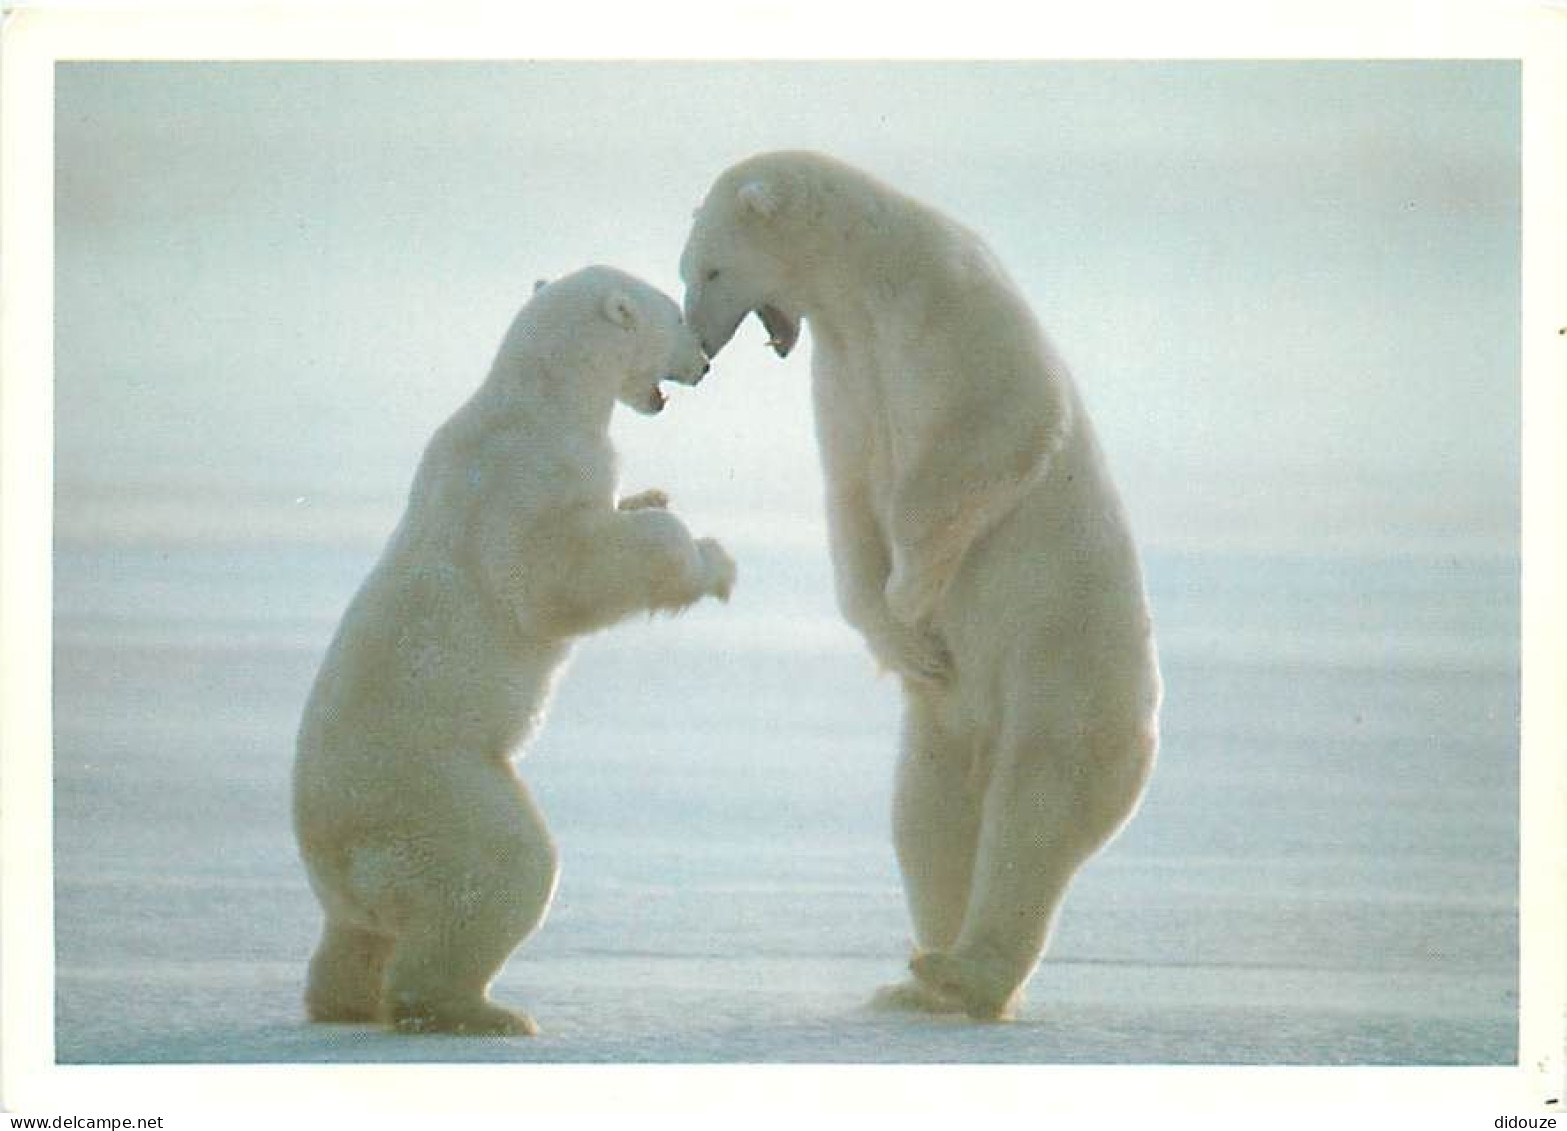 Animaux - Ours - Ours Blanc - Bear - CPM - Voir Scans Recto-Verso - Bears